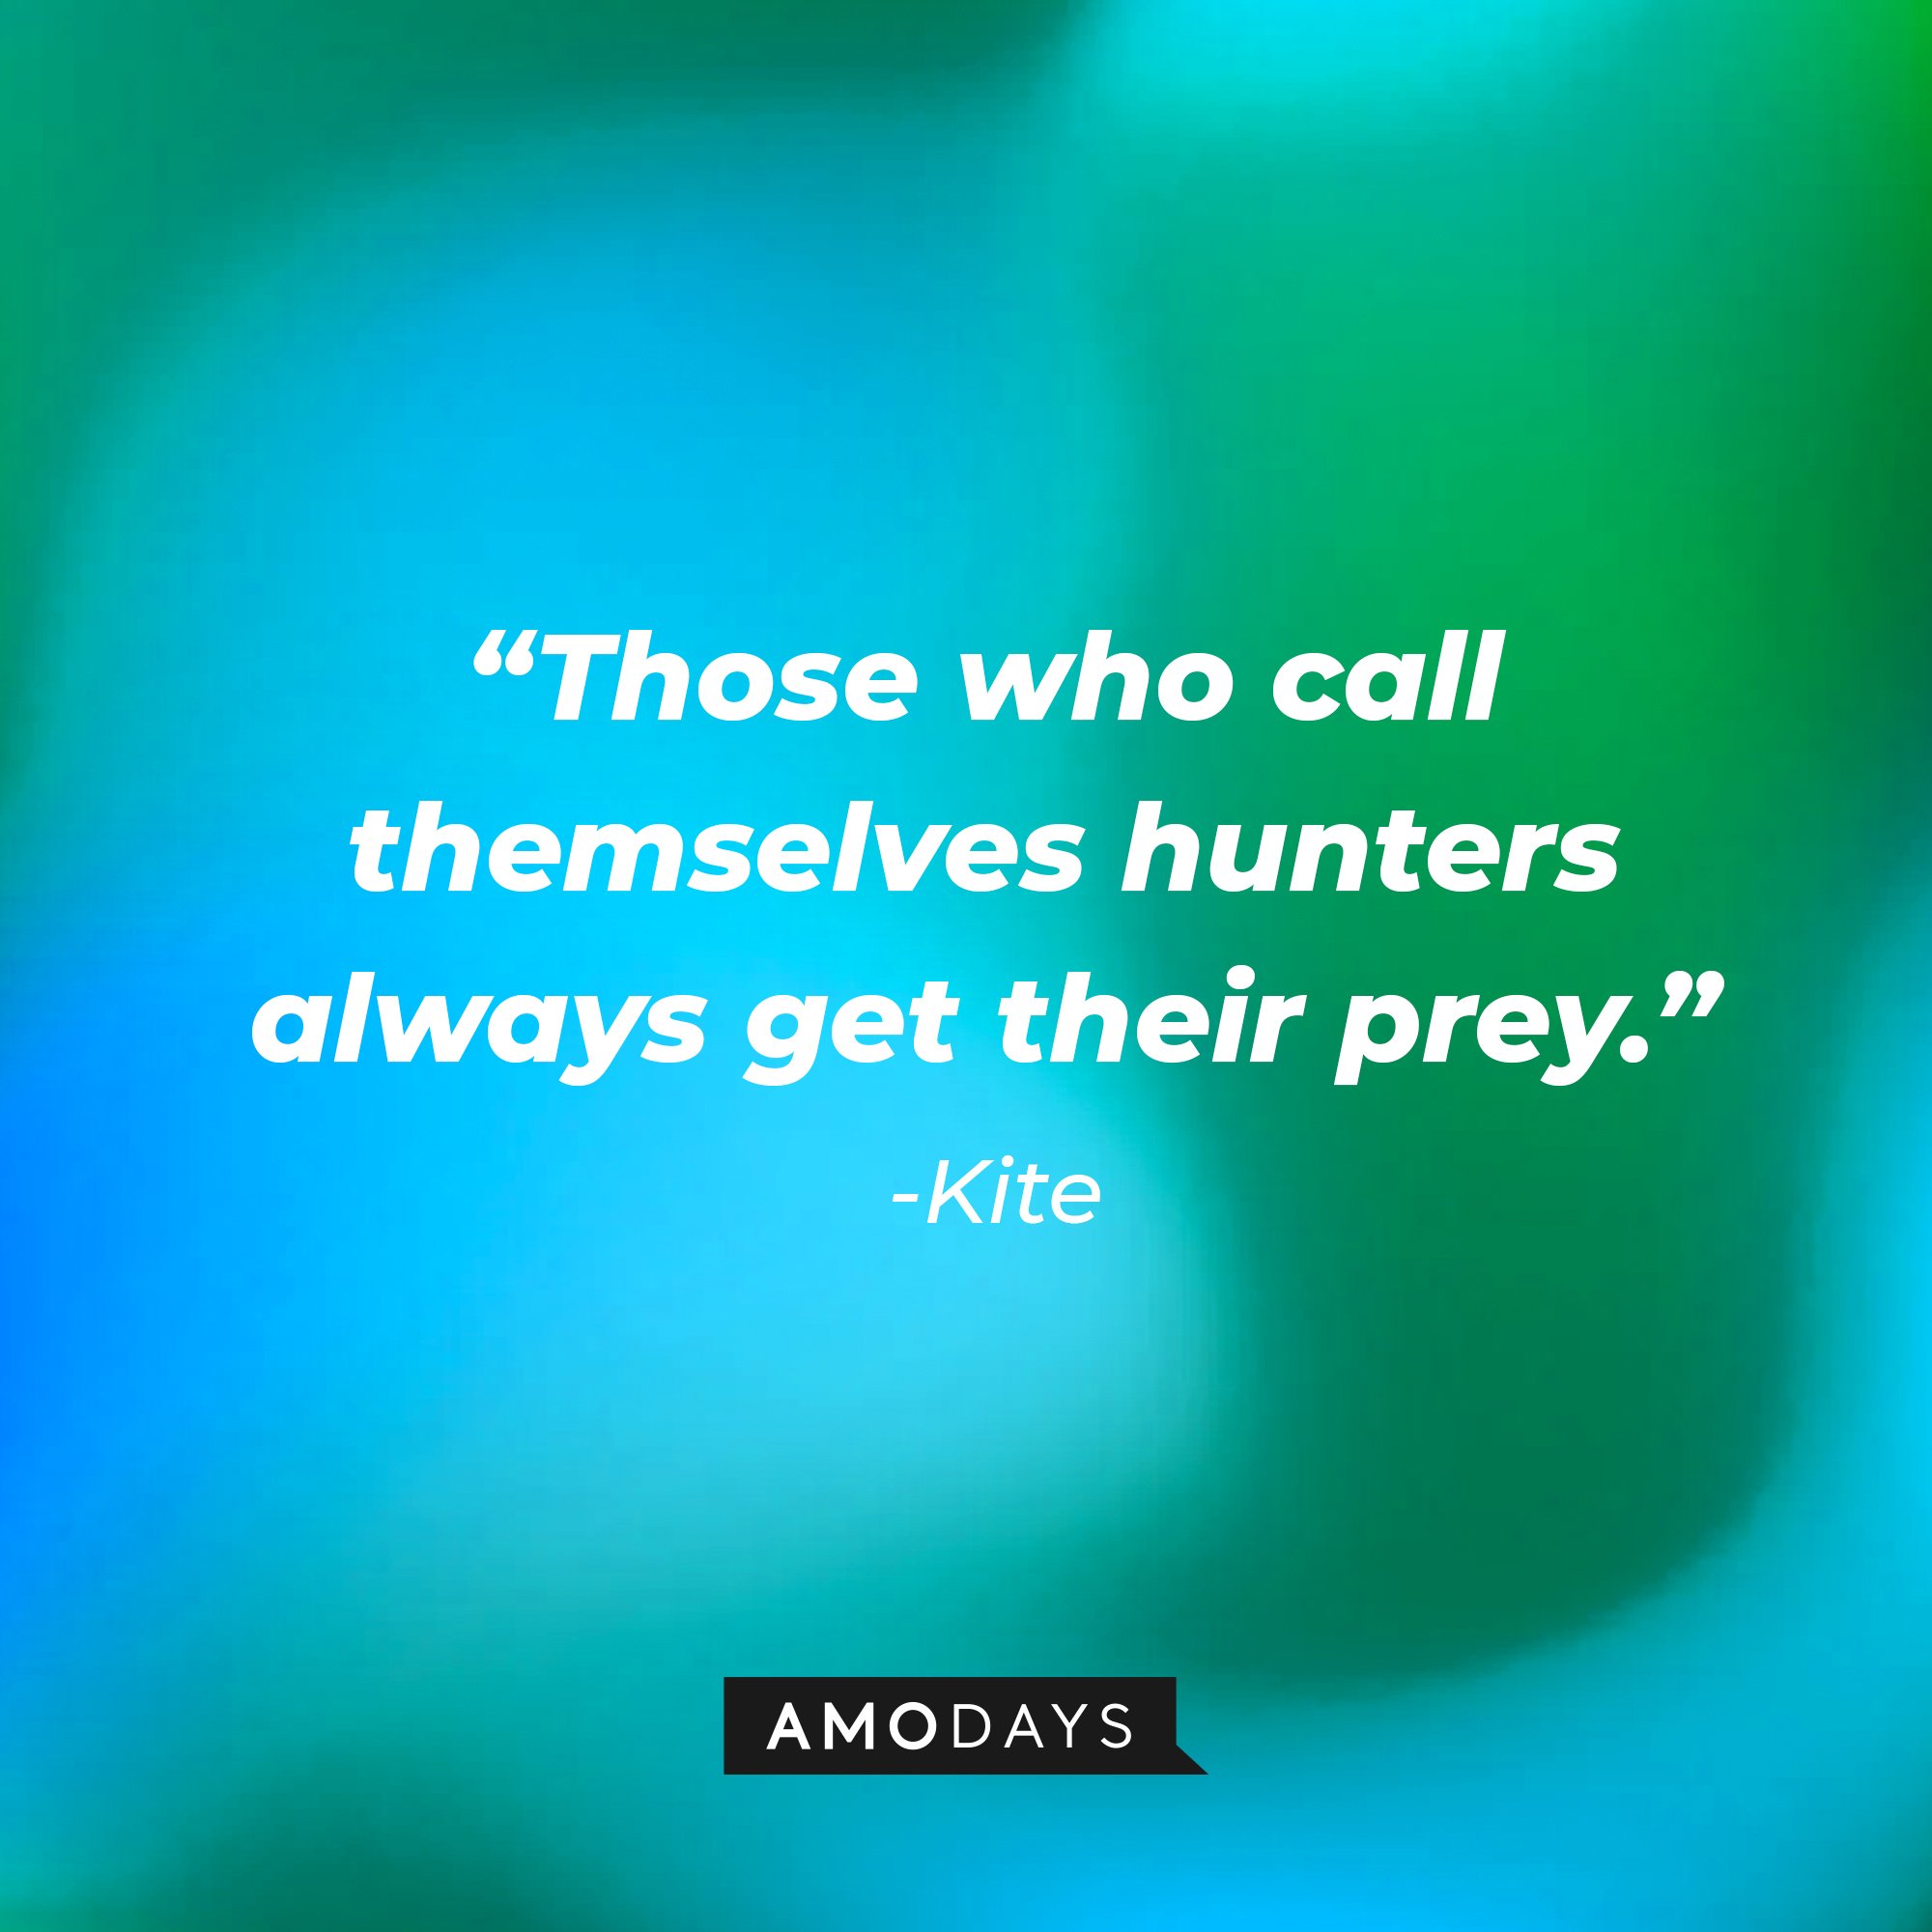  Kite’s quote: "Those who call themselves hunters always get their prey." | Image: AmoDays